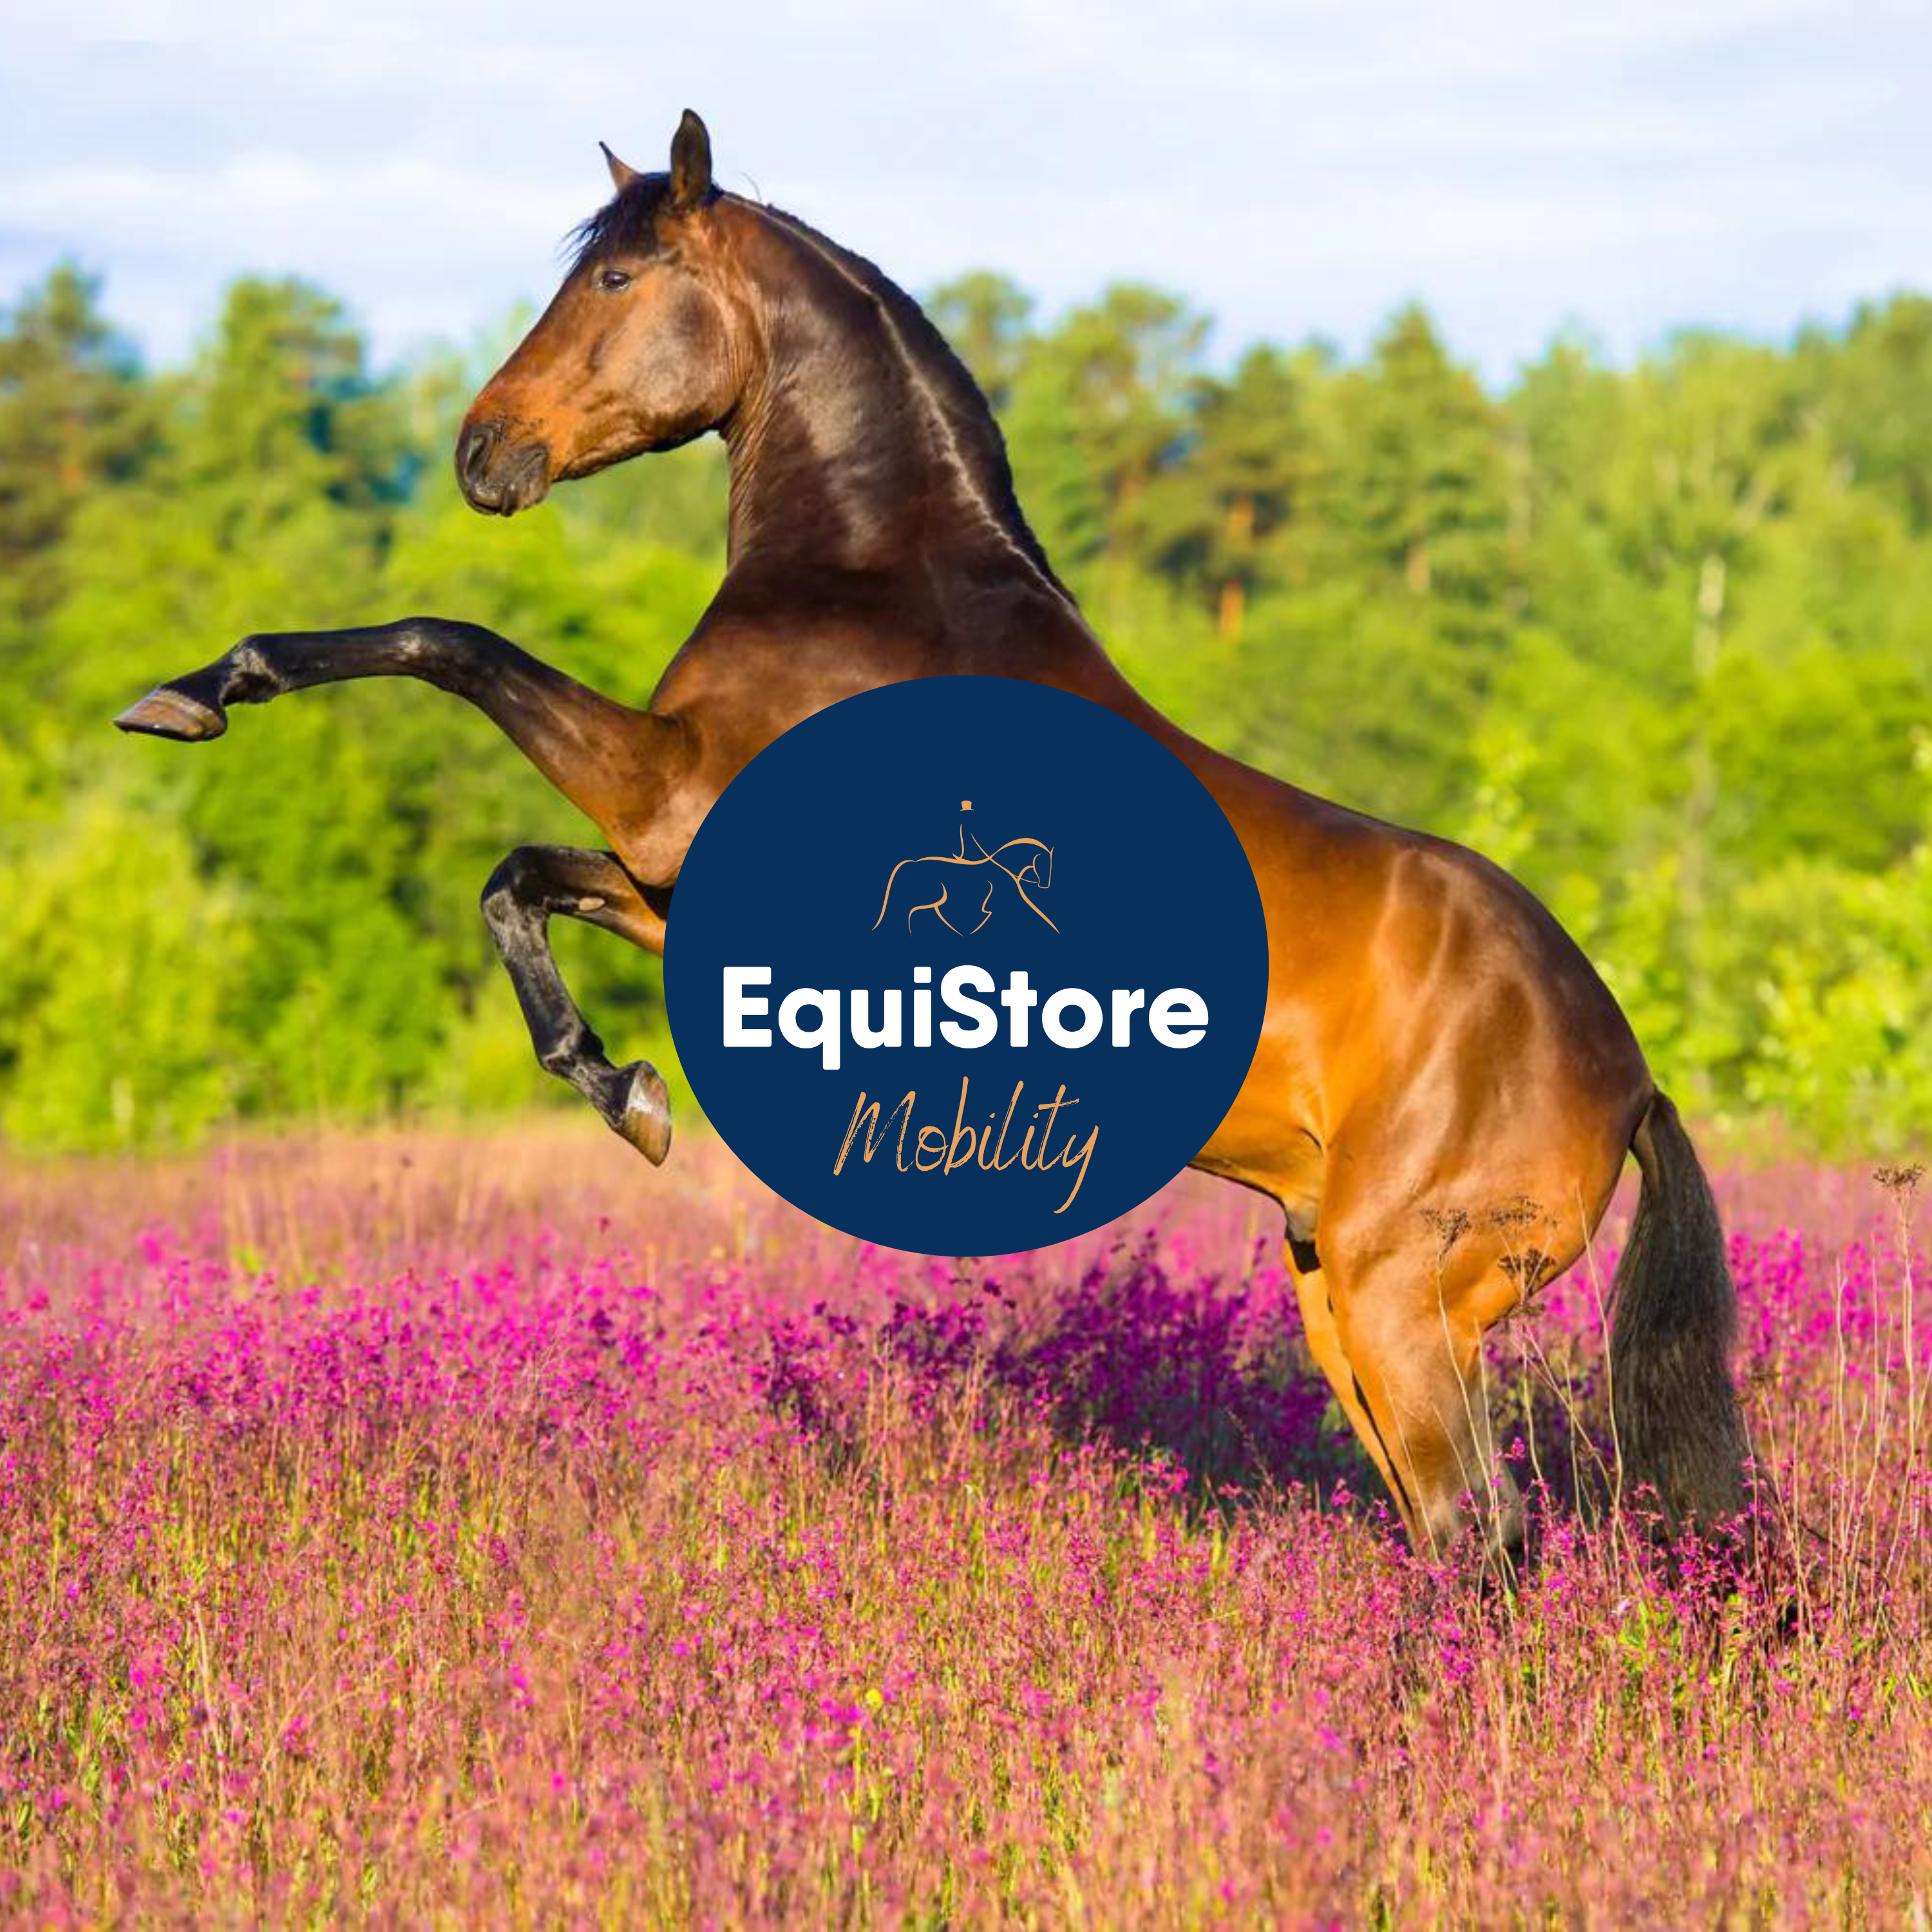 A range of horse supplements aimed at improving and maintaining mobility, available at EquiStore in Ireland.